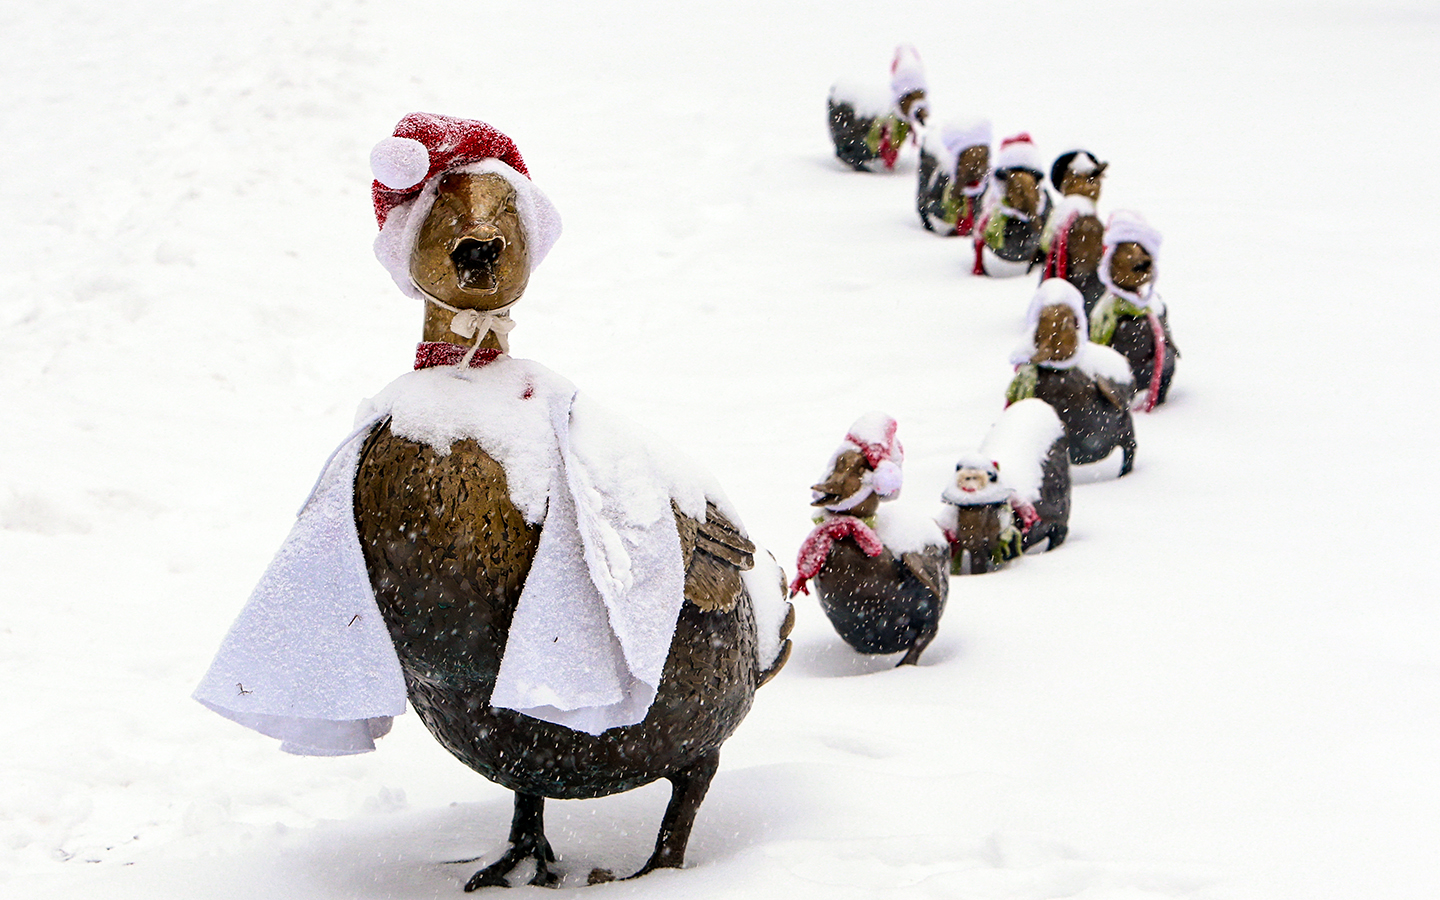 The Iconic "Make Way For Ducklings" statues are all dressed up for the cold